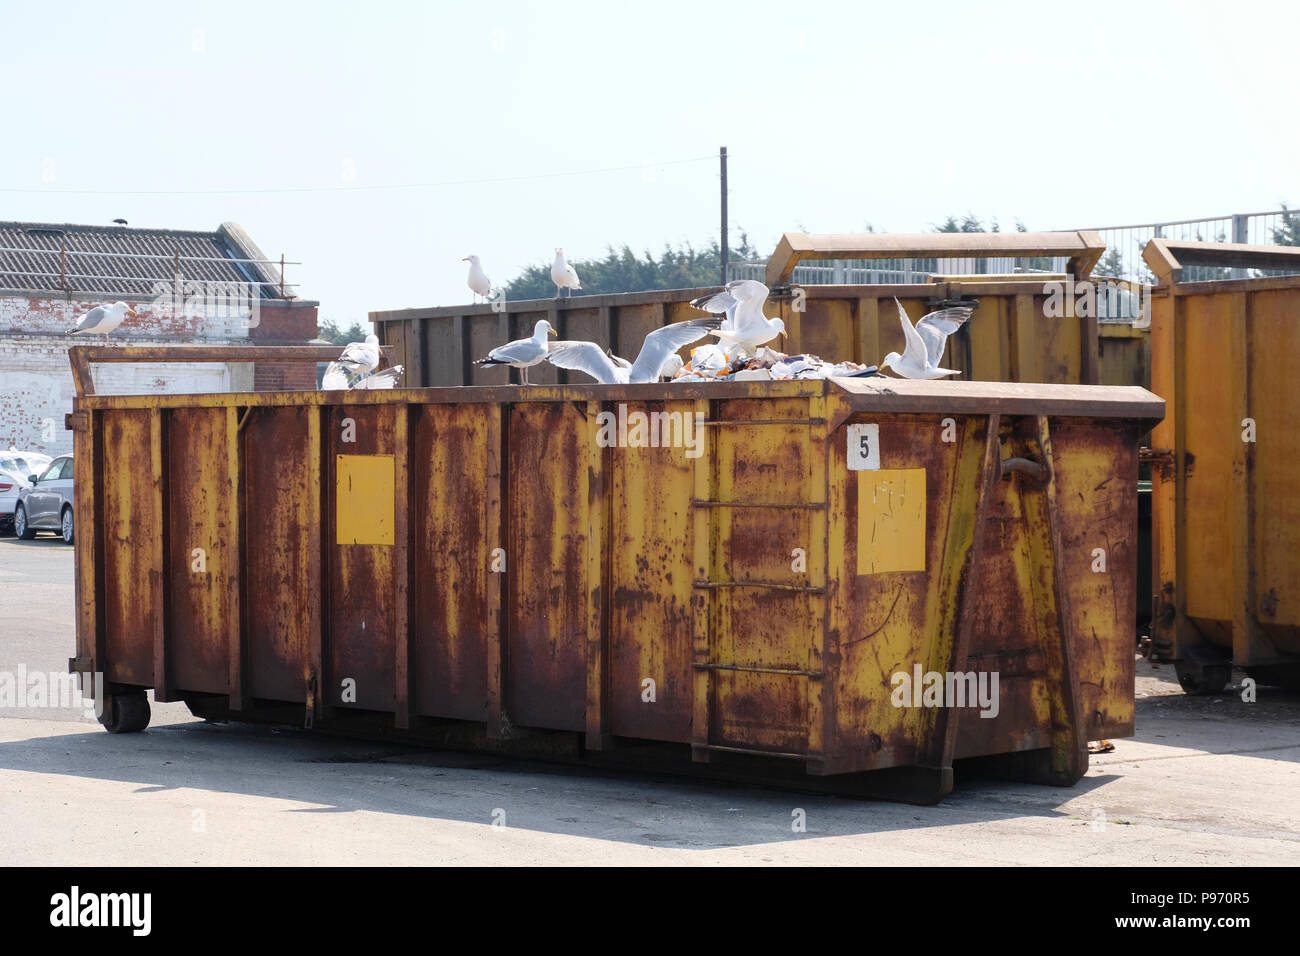 Worthing, West Sussex, England. Seagulls foraging for food in large commercial skip. Stock Photo